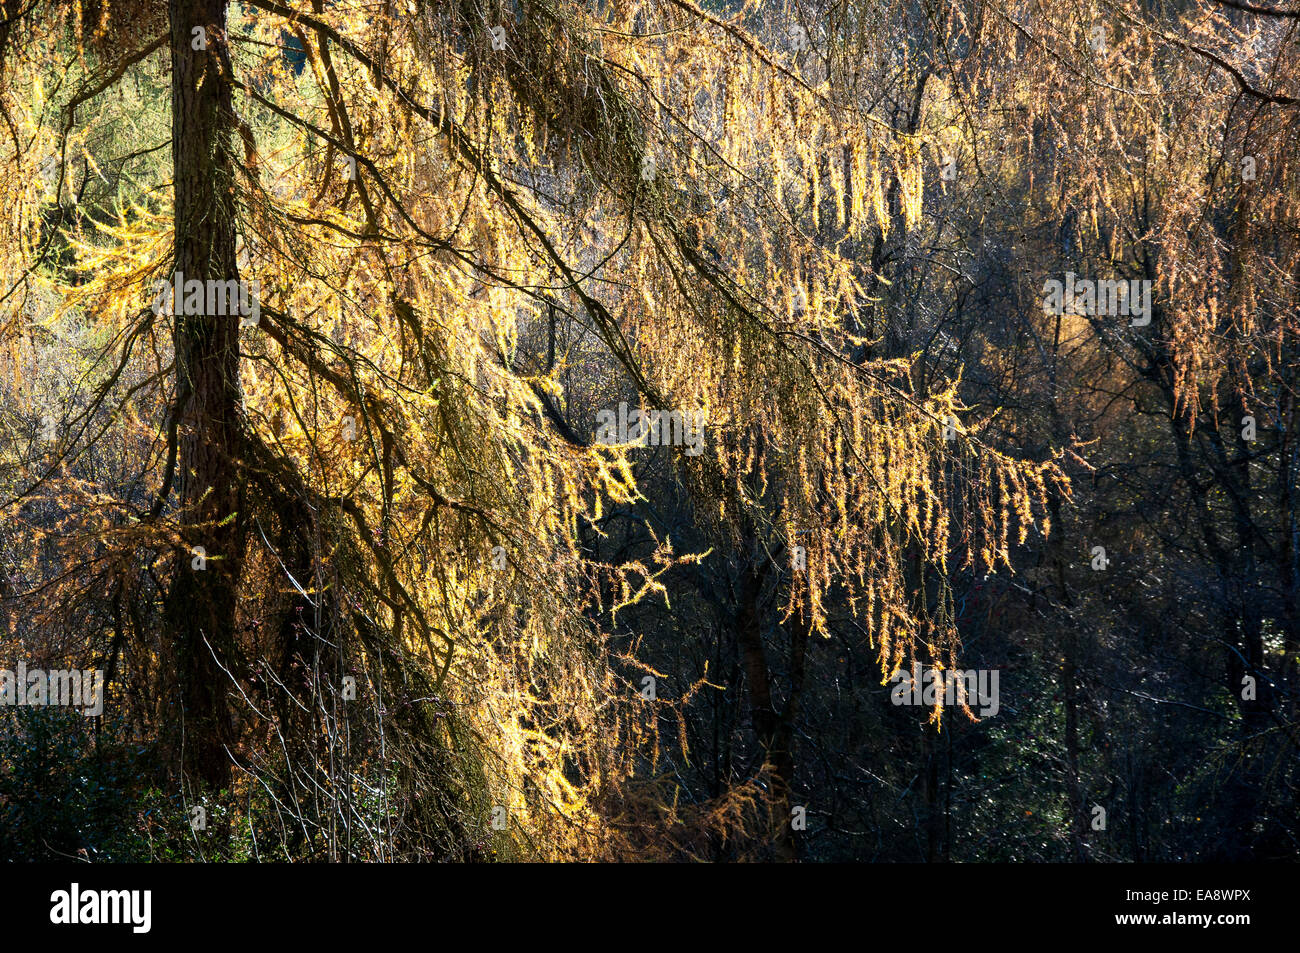 Larch tree branches with yellow autumn colour in sunlight contrasting with a dark, shadow background. Stock Photo